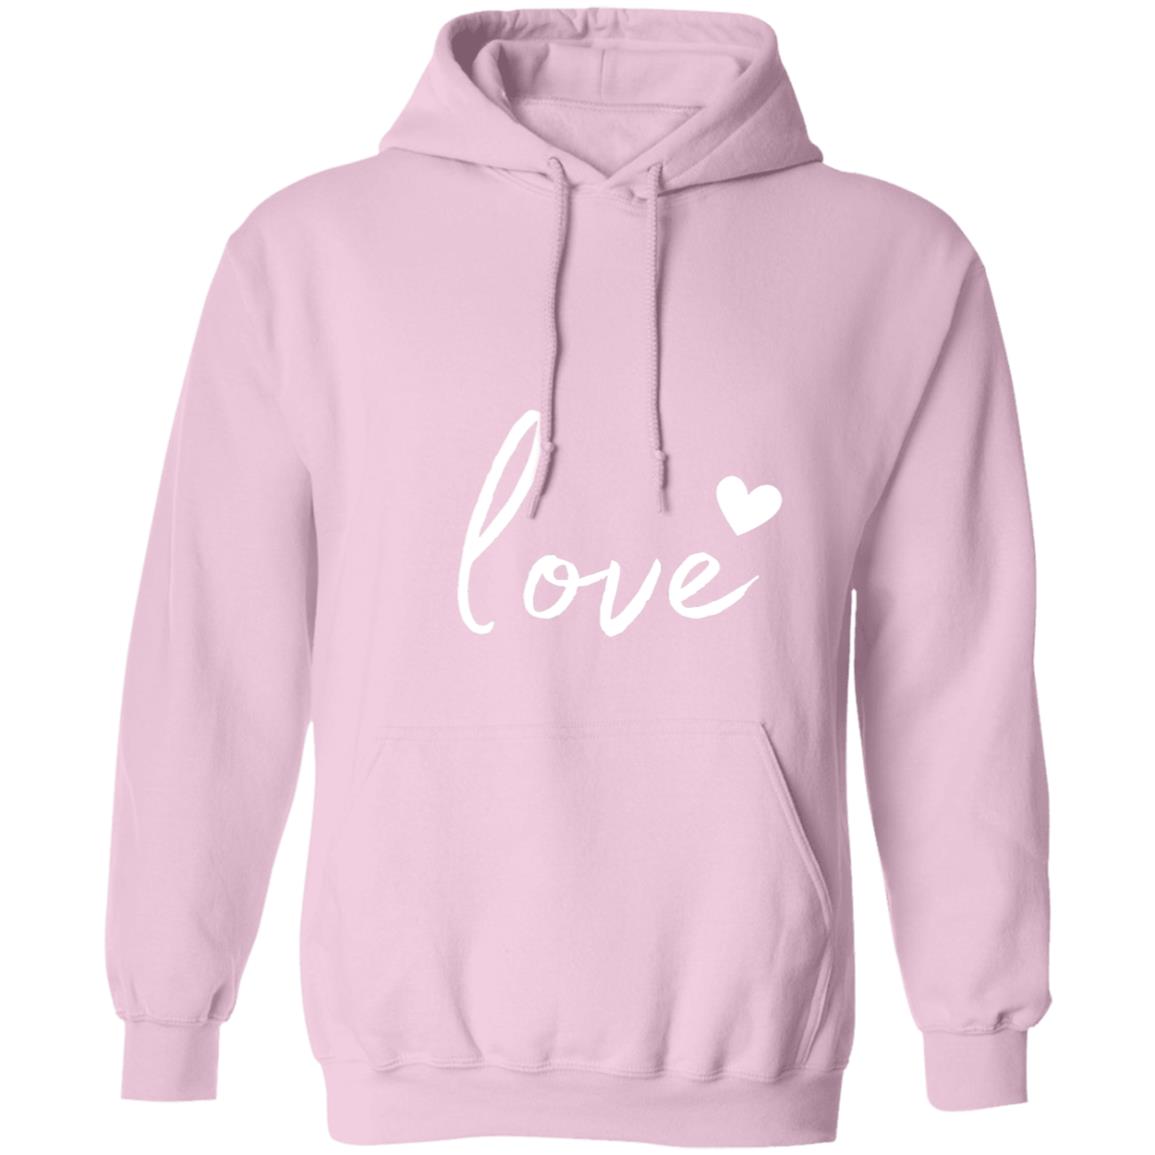 Get trendy with love t shirt (1) Z66x Pullover Hoodie 8 oz (Closeout) -  available at Good Gift Company. Grab yours for $32 today!